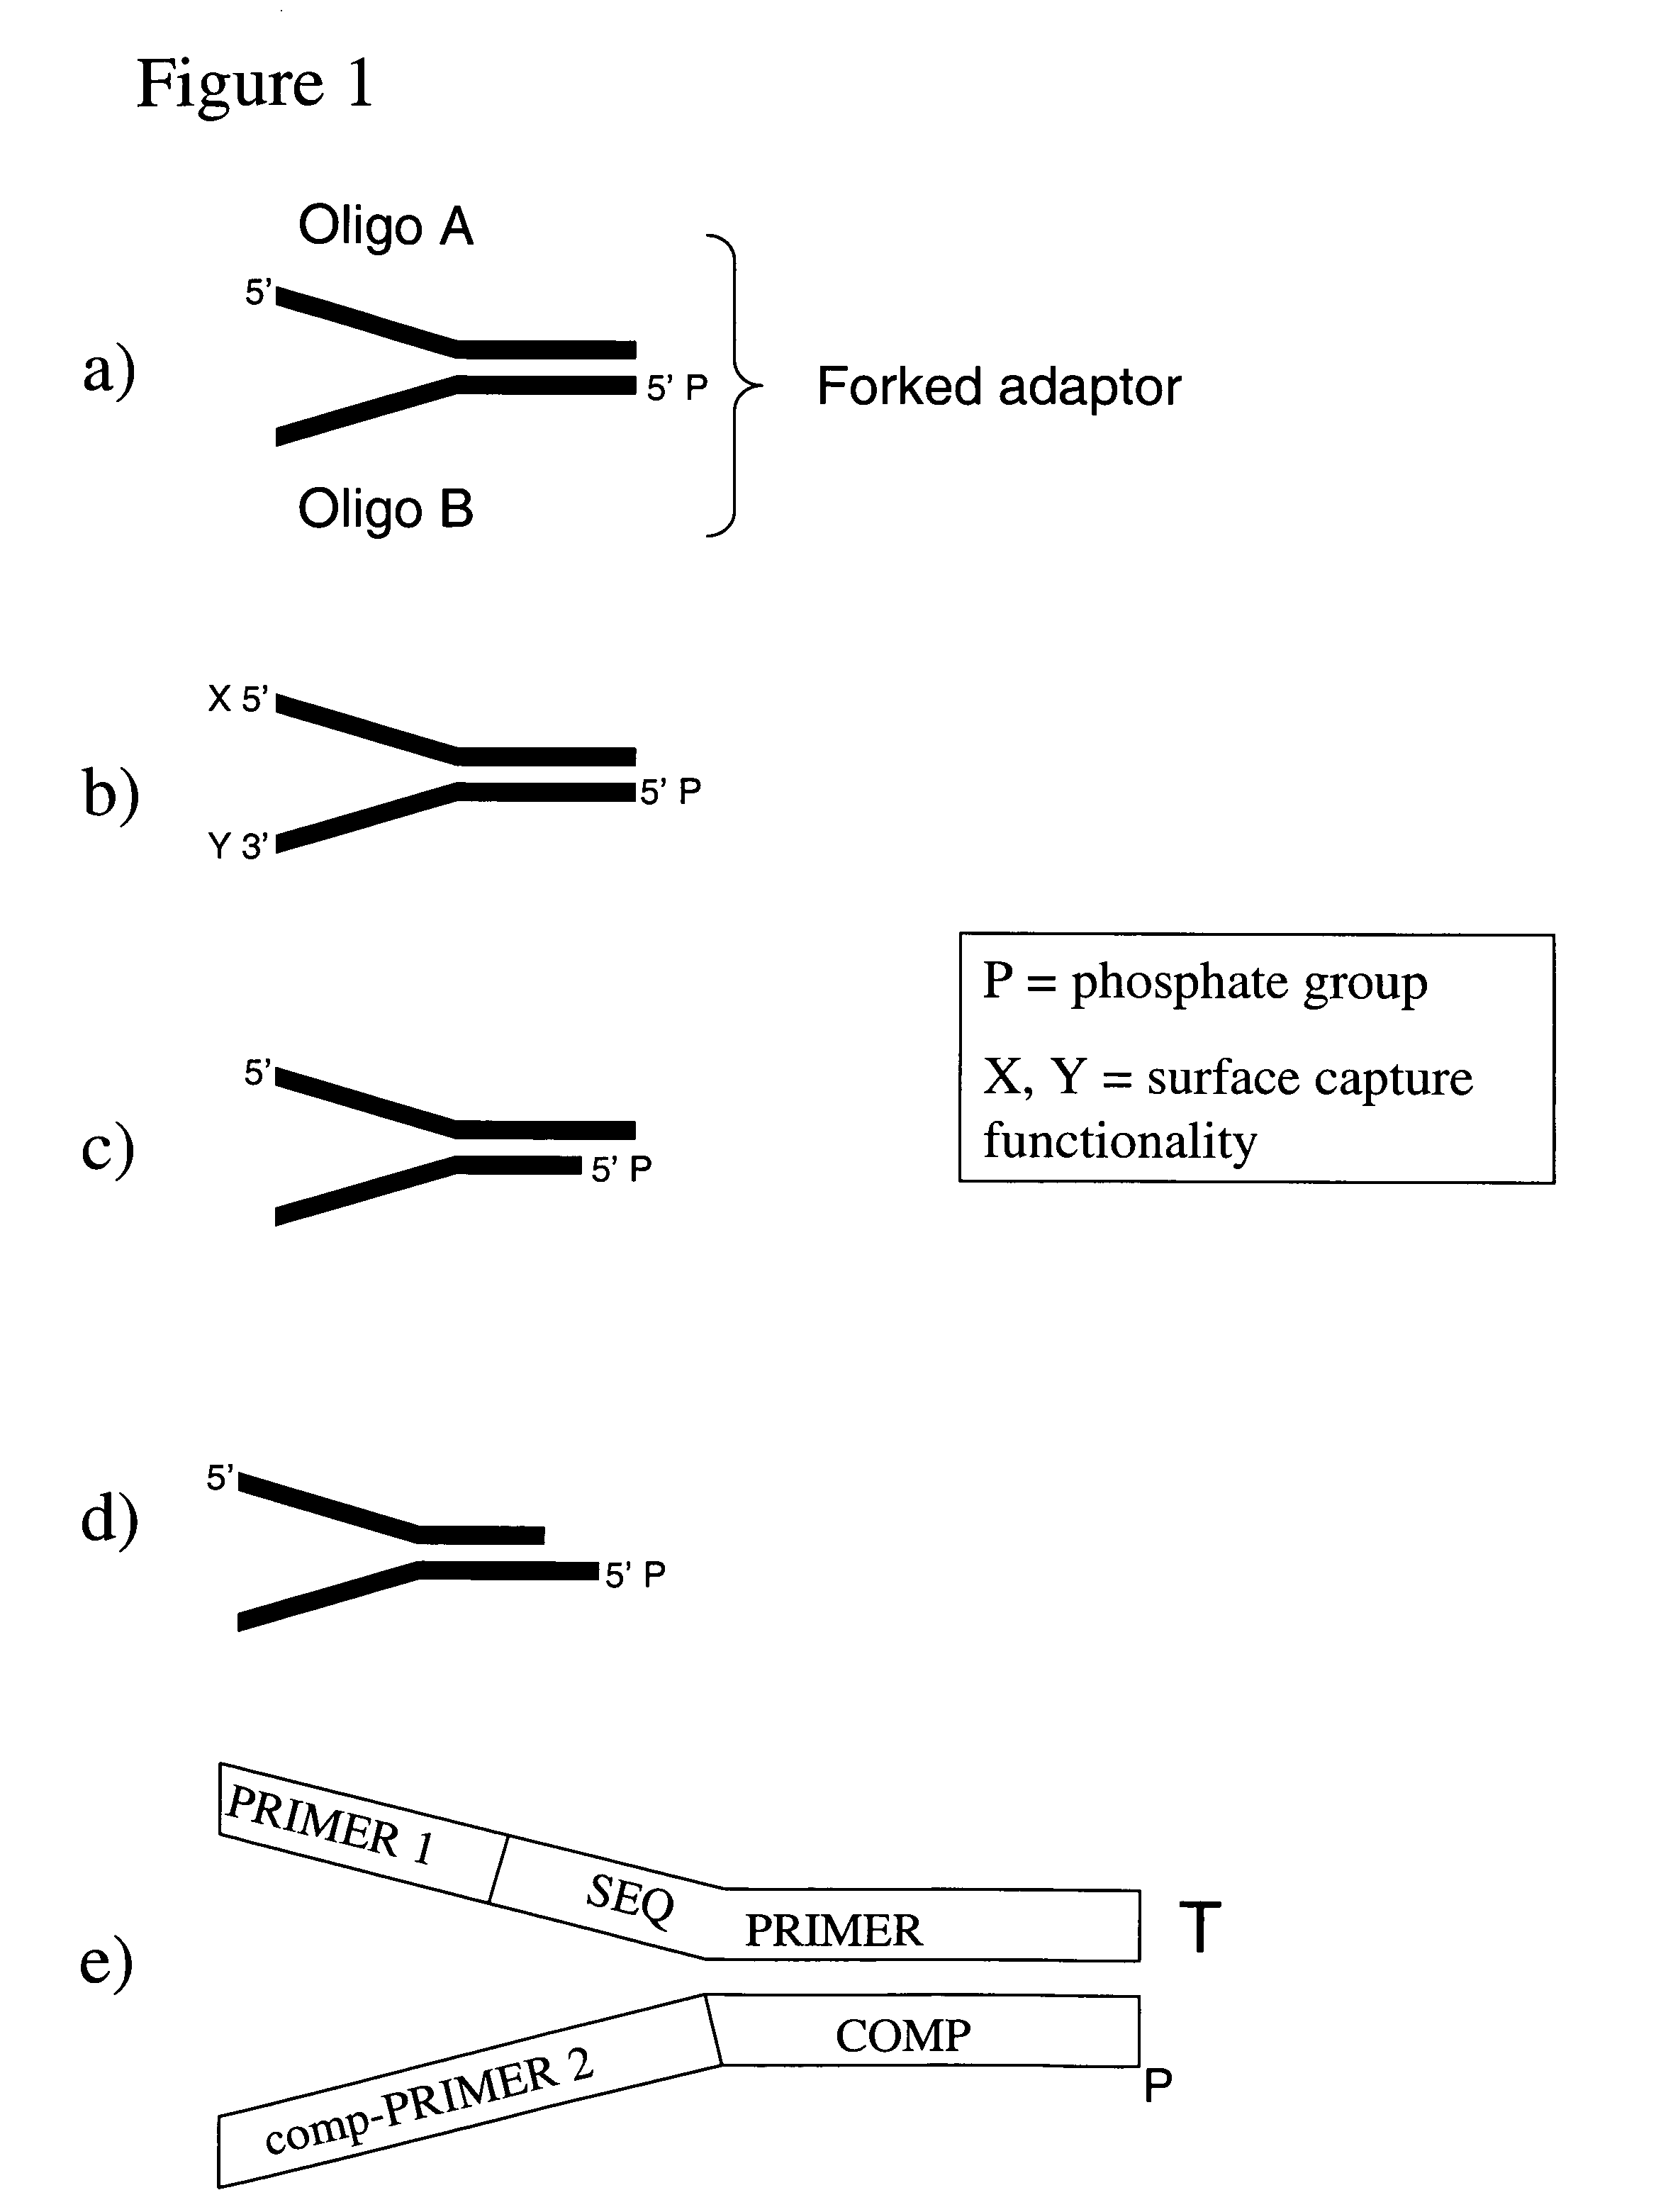 Method of preparing libraries of template polynucleotides